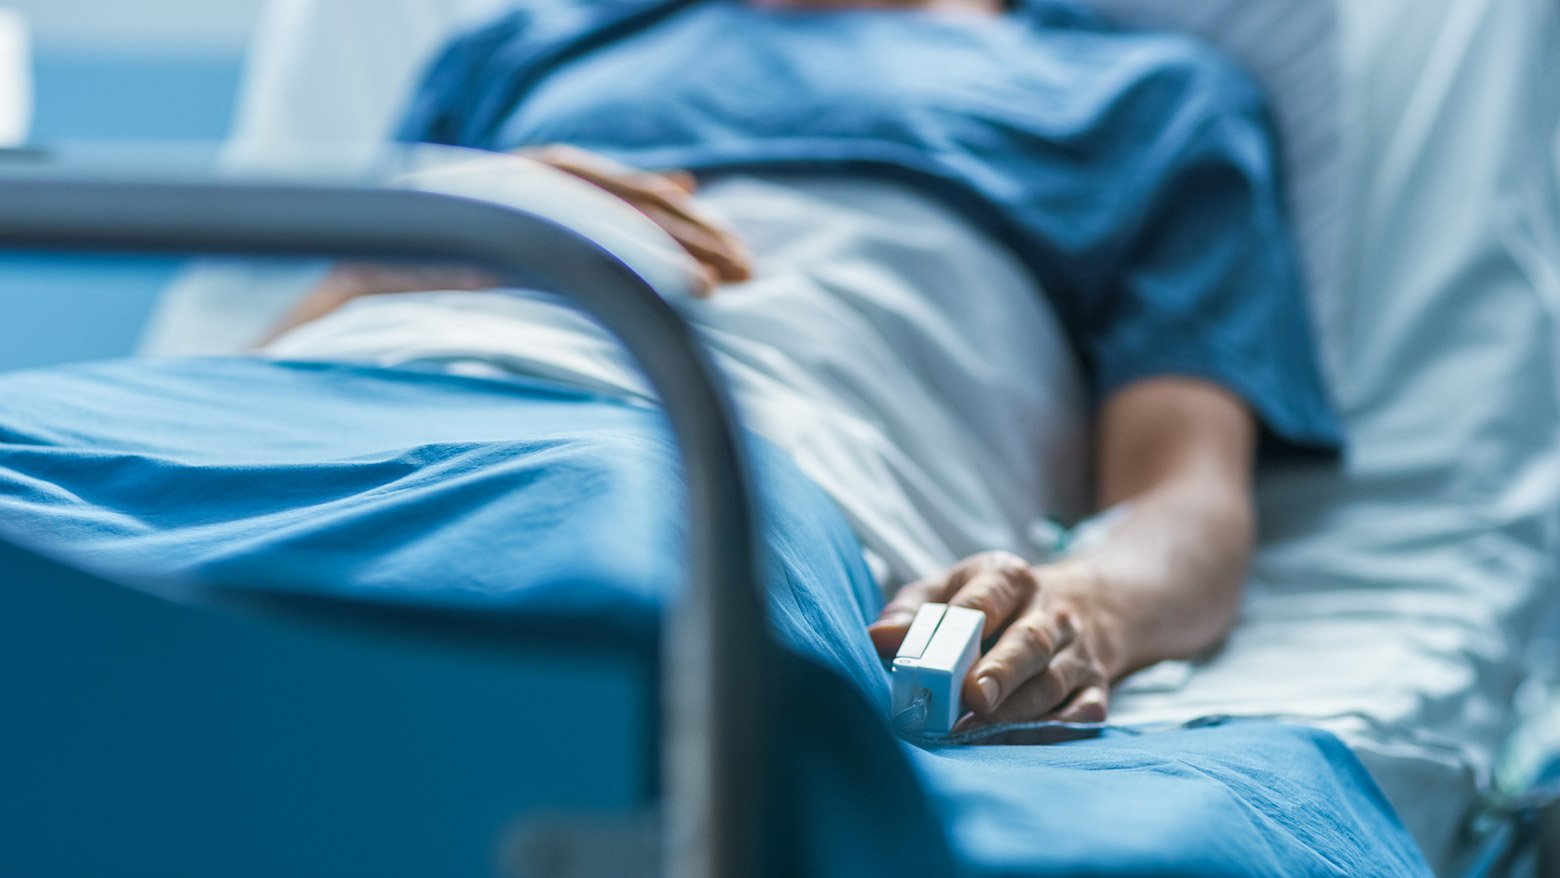 Patient lies in a hospital bed